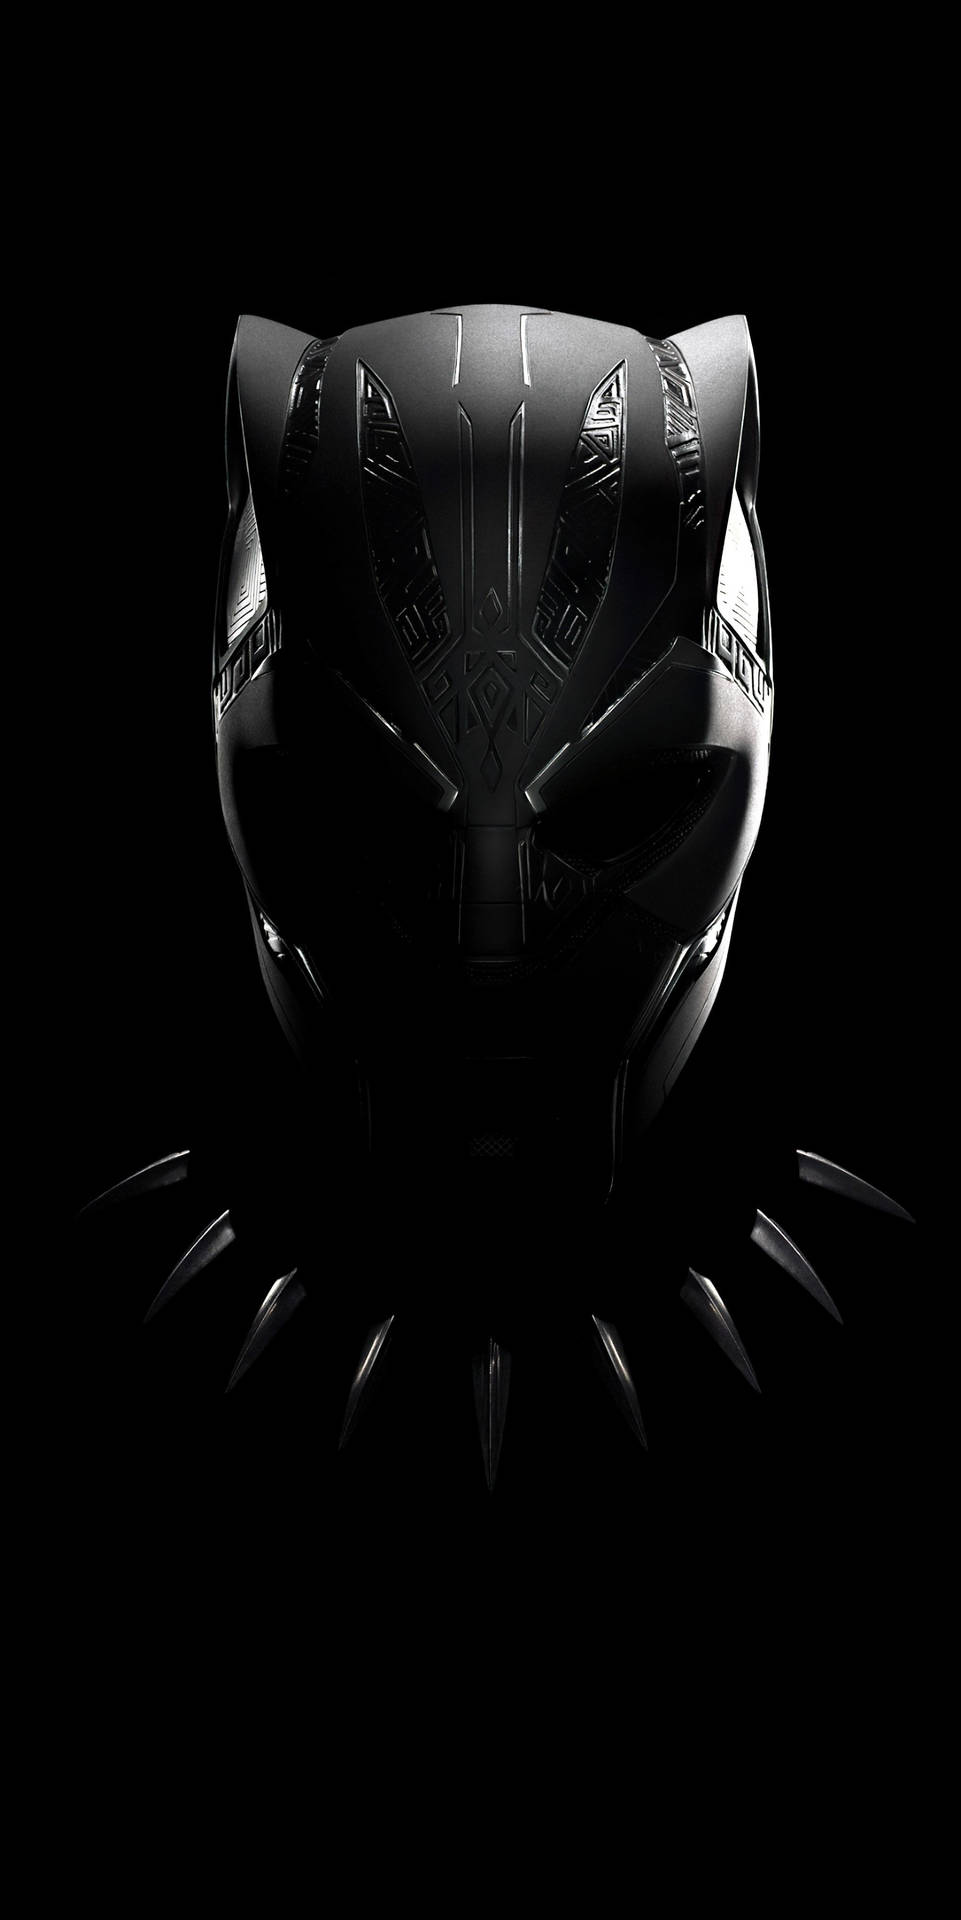 Sleek Suit Black Panther Android Background